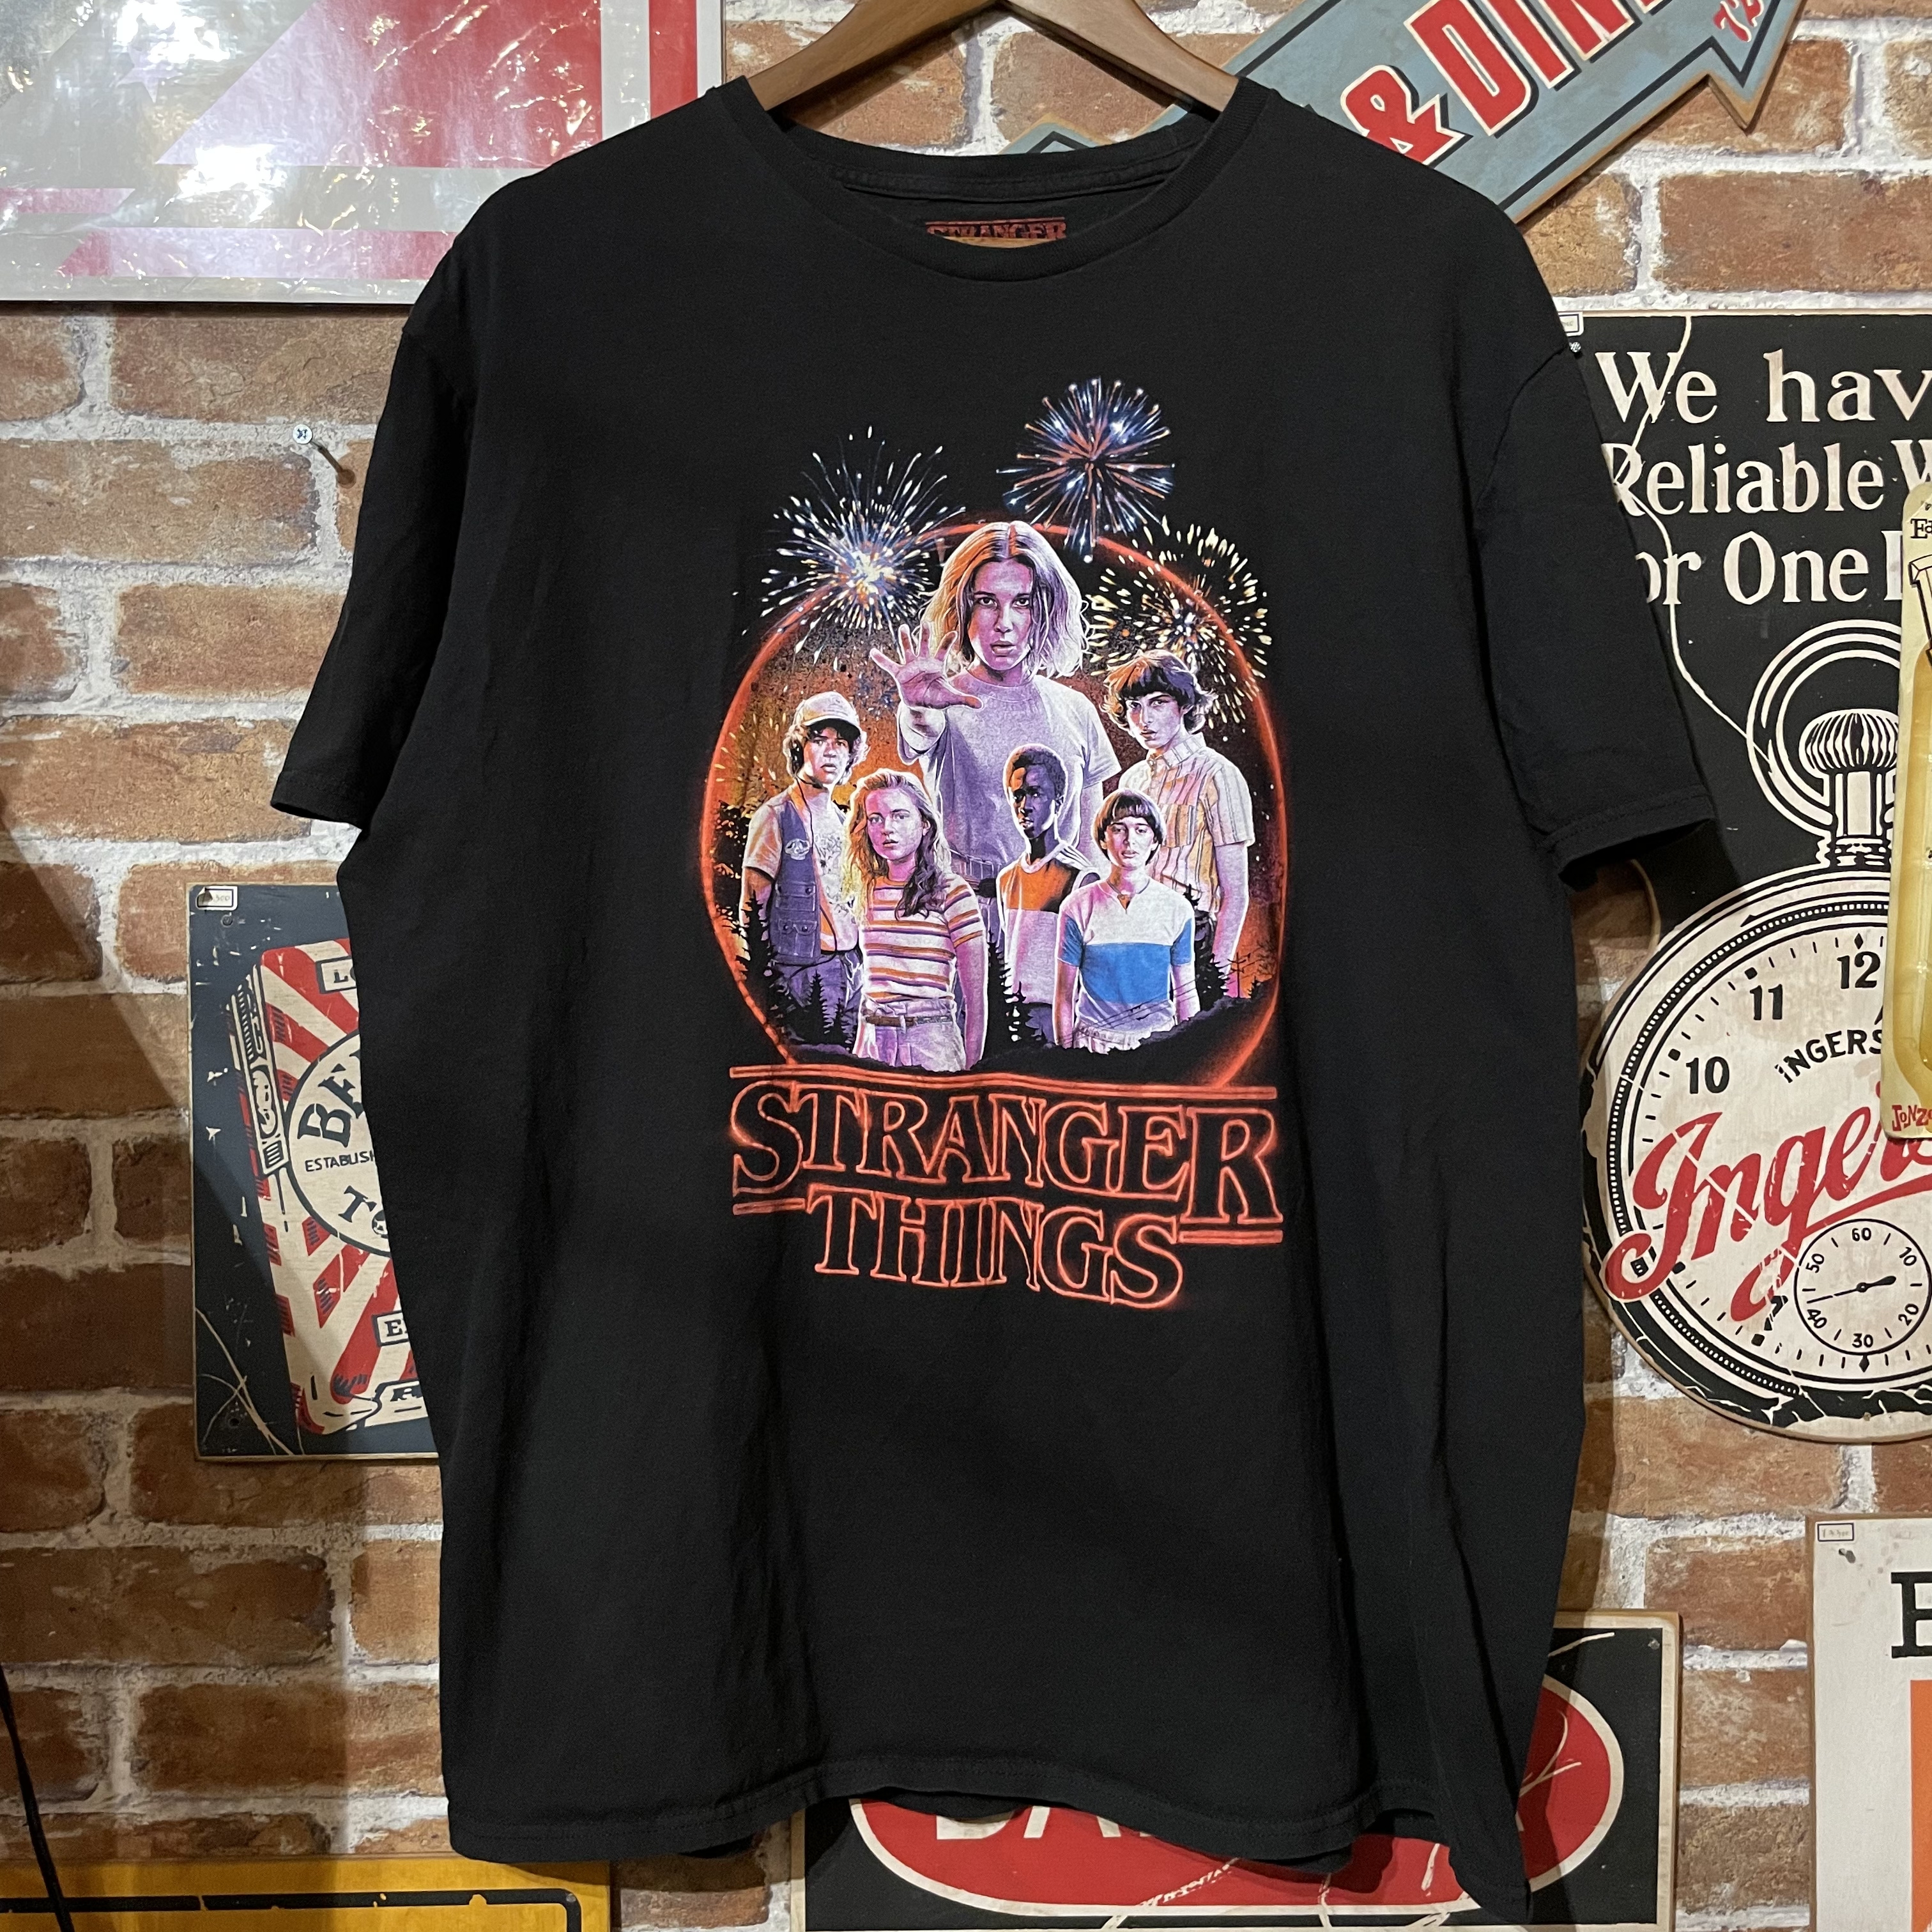 STRANGER THINGS NETFLIX OFFICIAL MOVIE Tシャツ